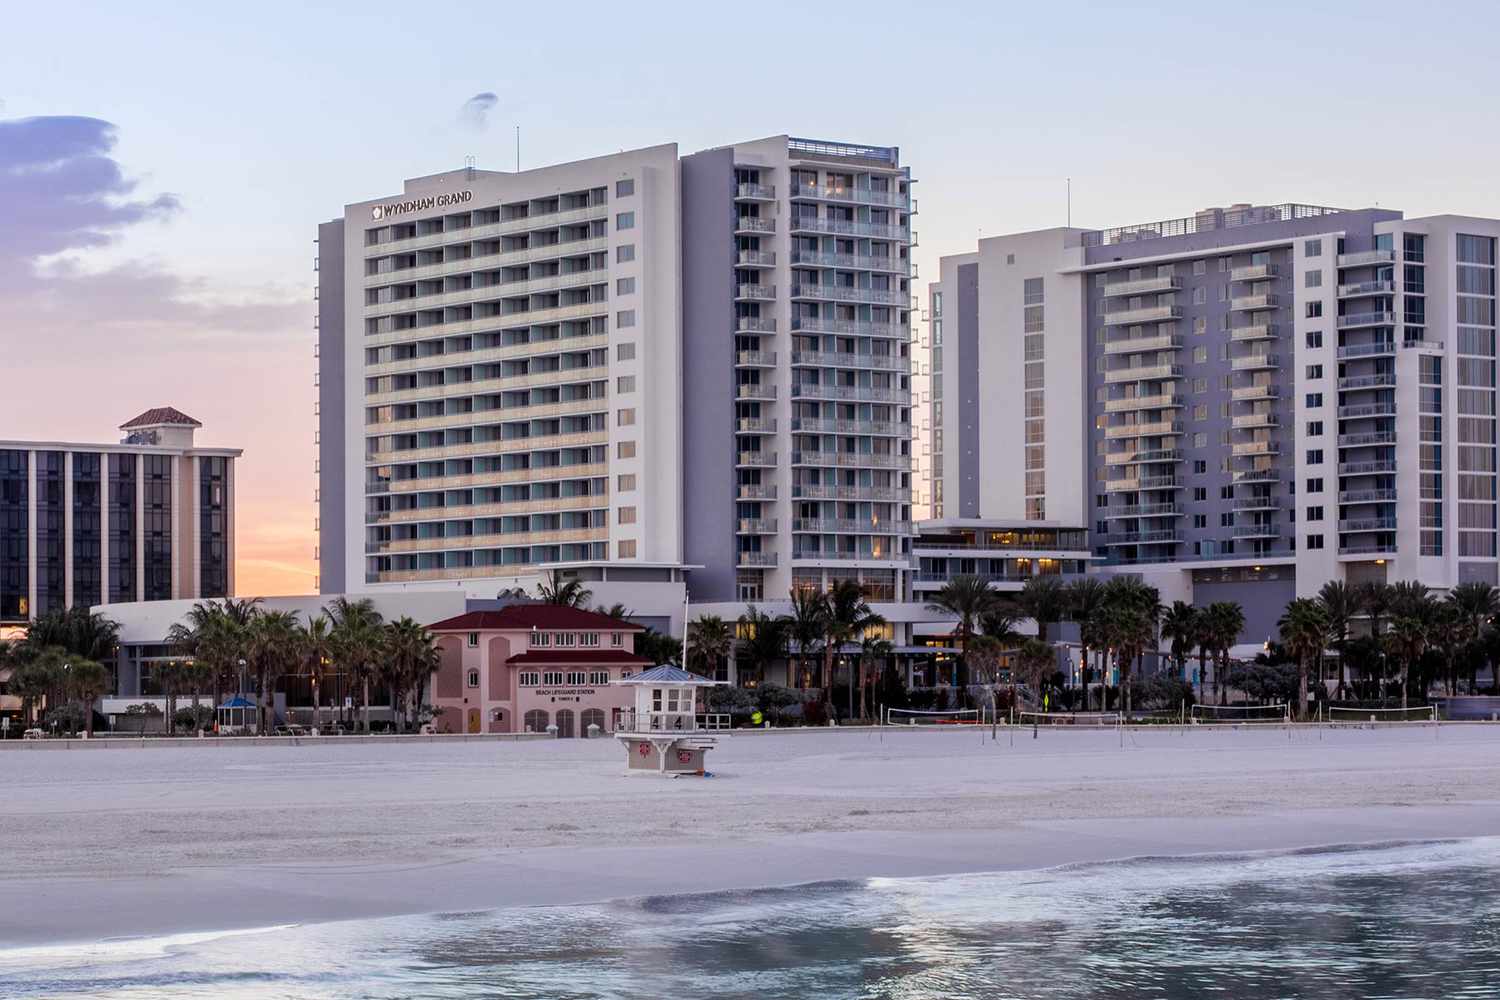 9-facts-about-urban-development-in-clearwater-florida